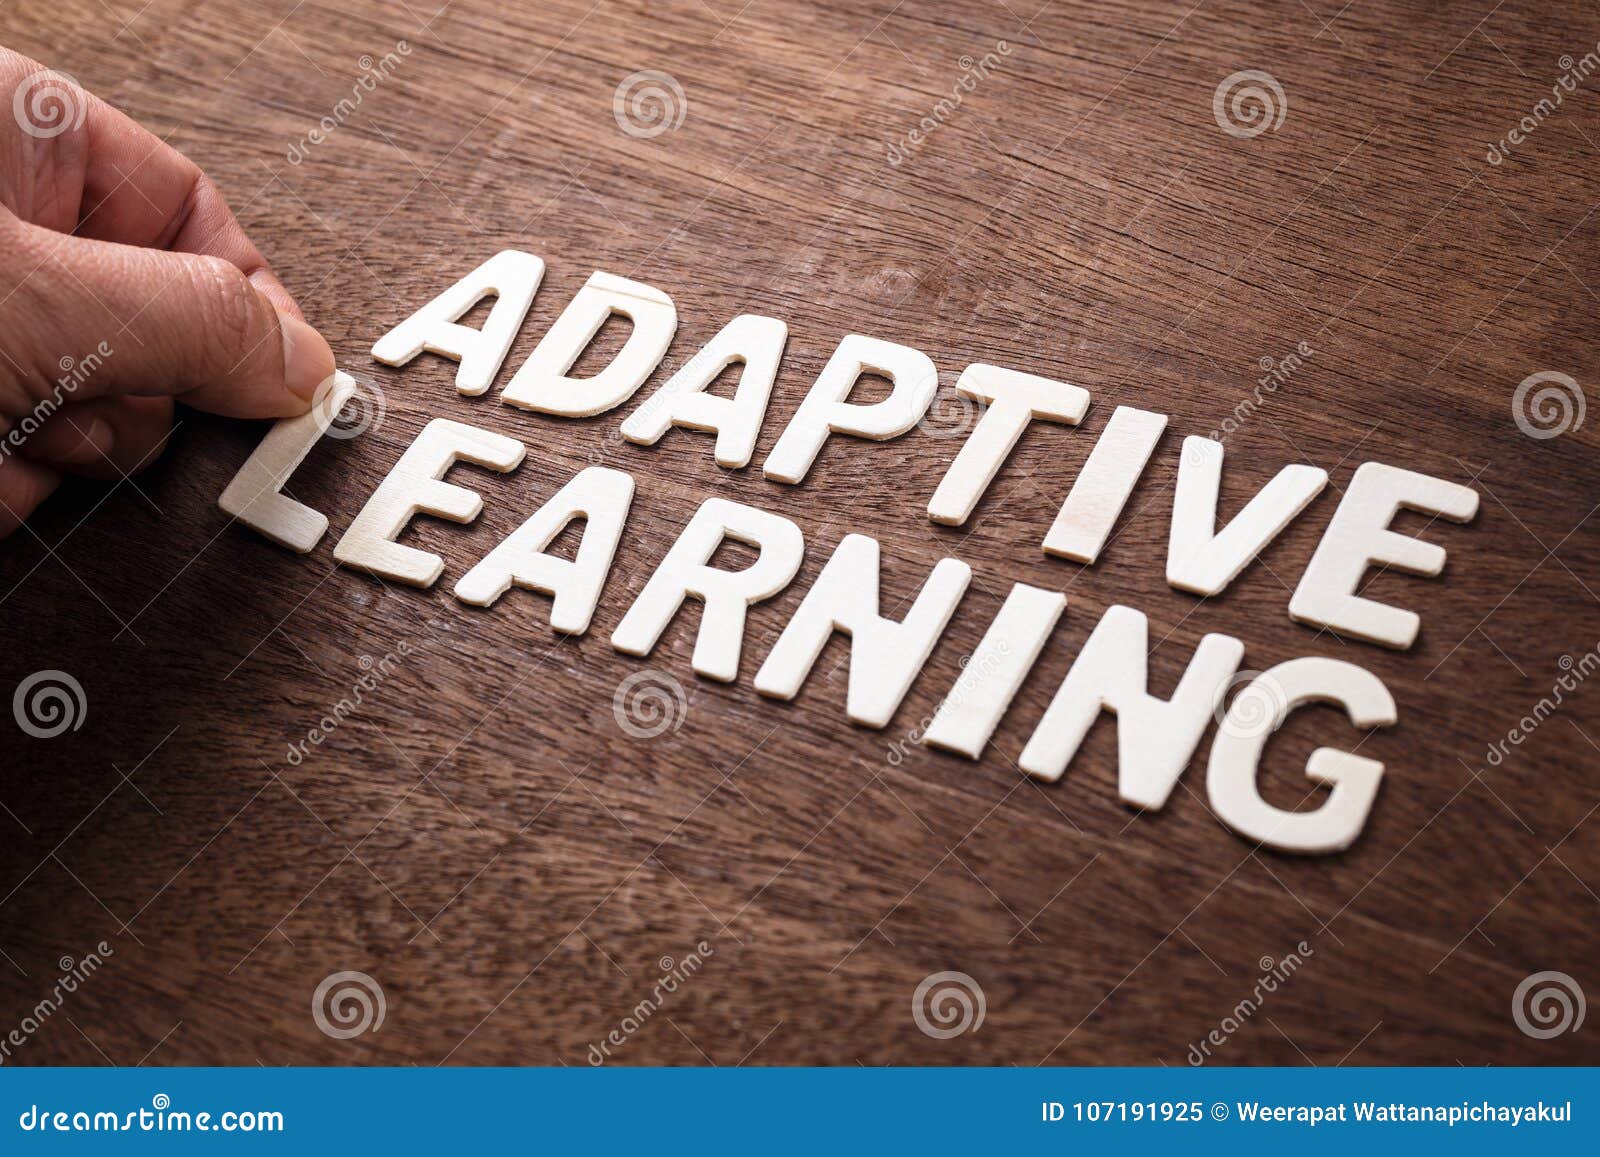 adaptive learning letters